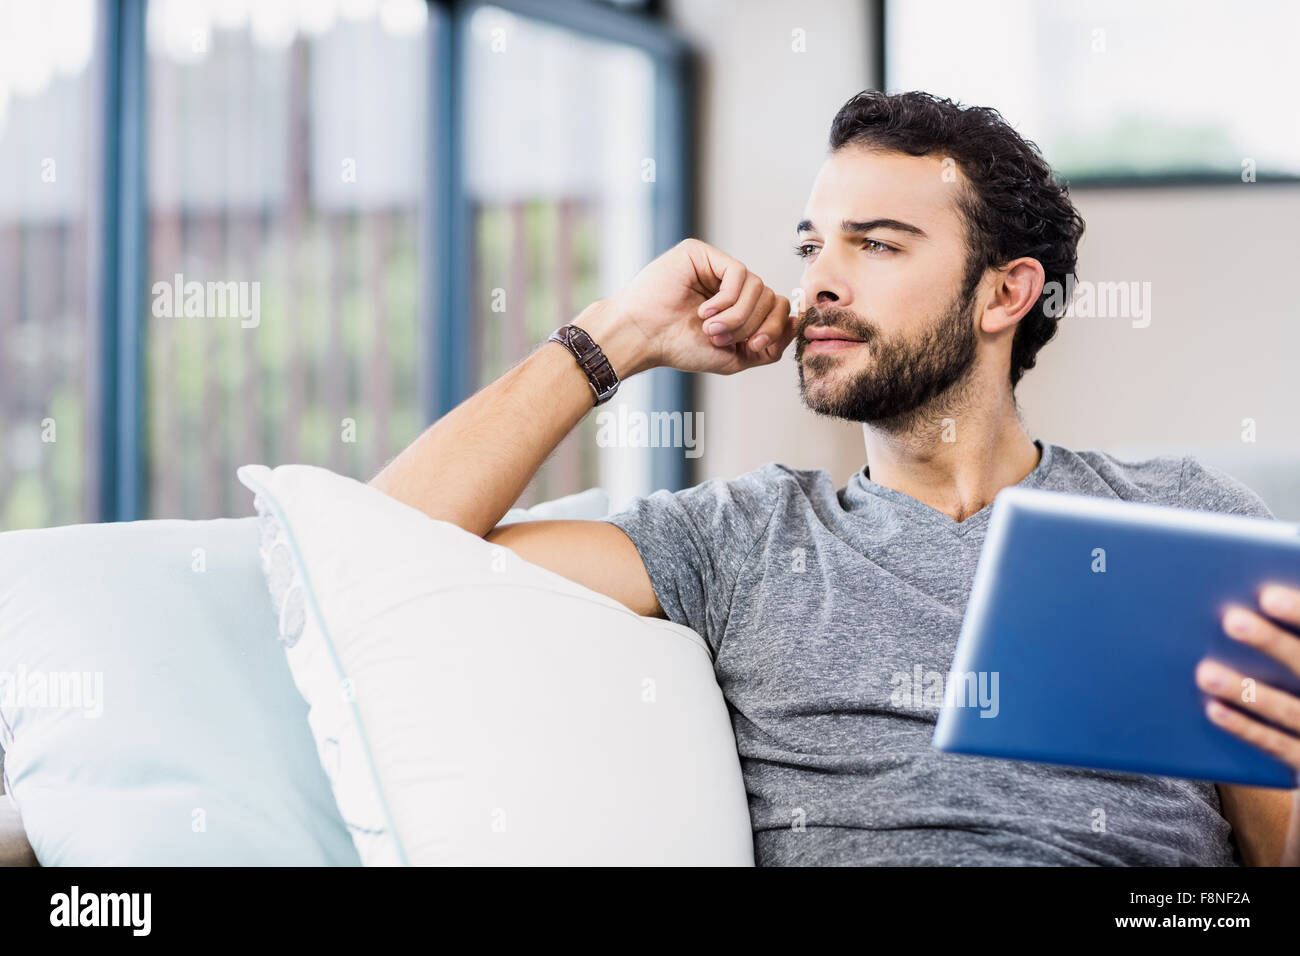 Thoughtful man holding tablet Banque D'Images